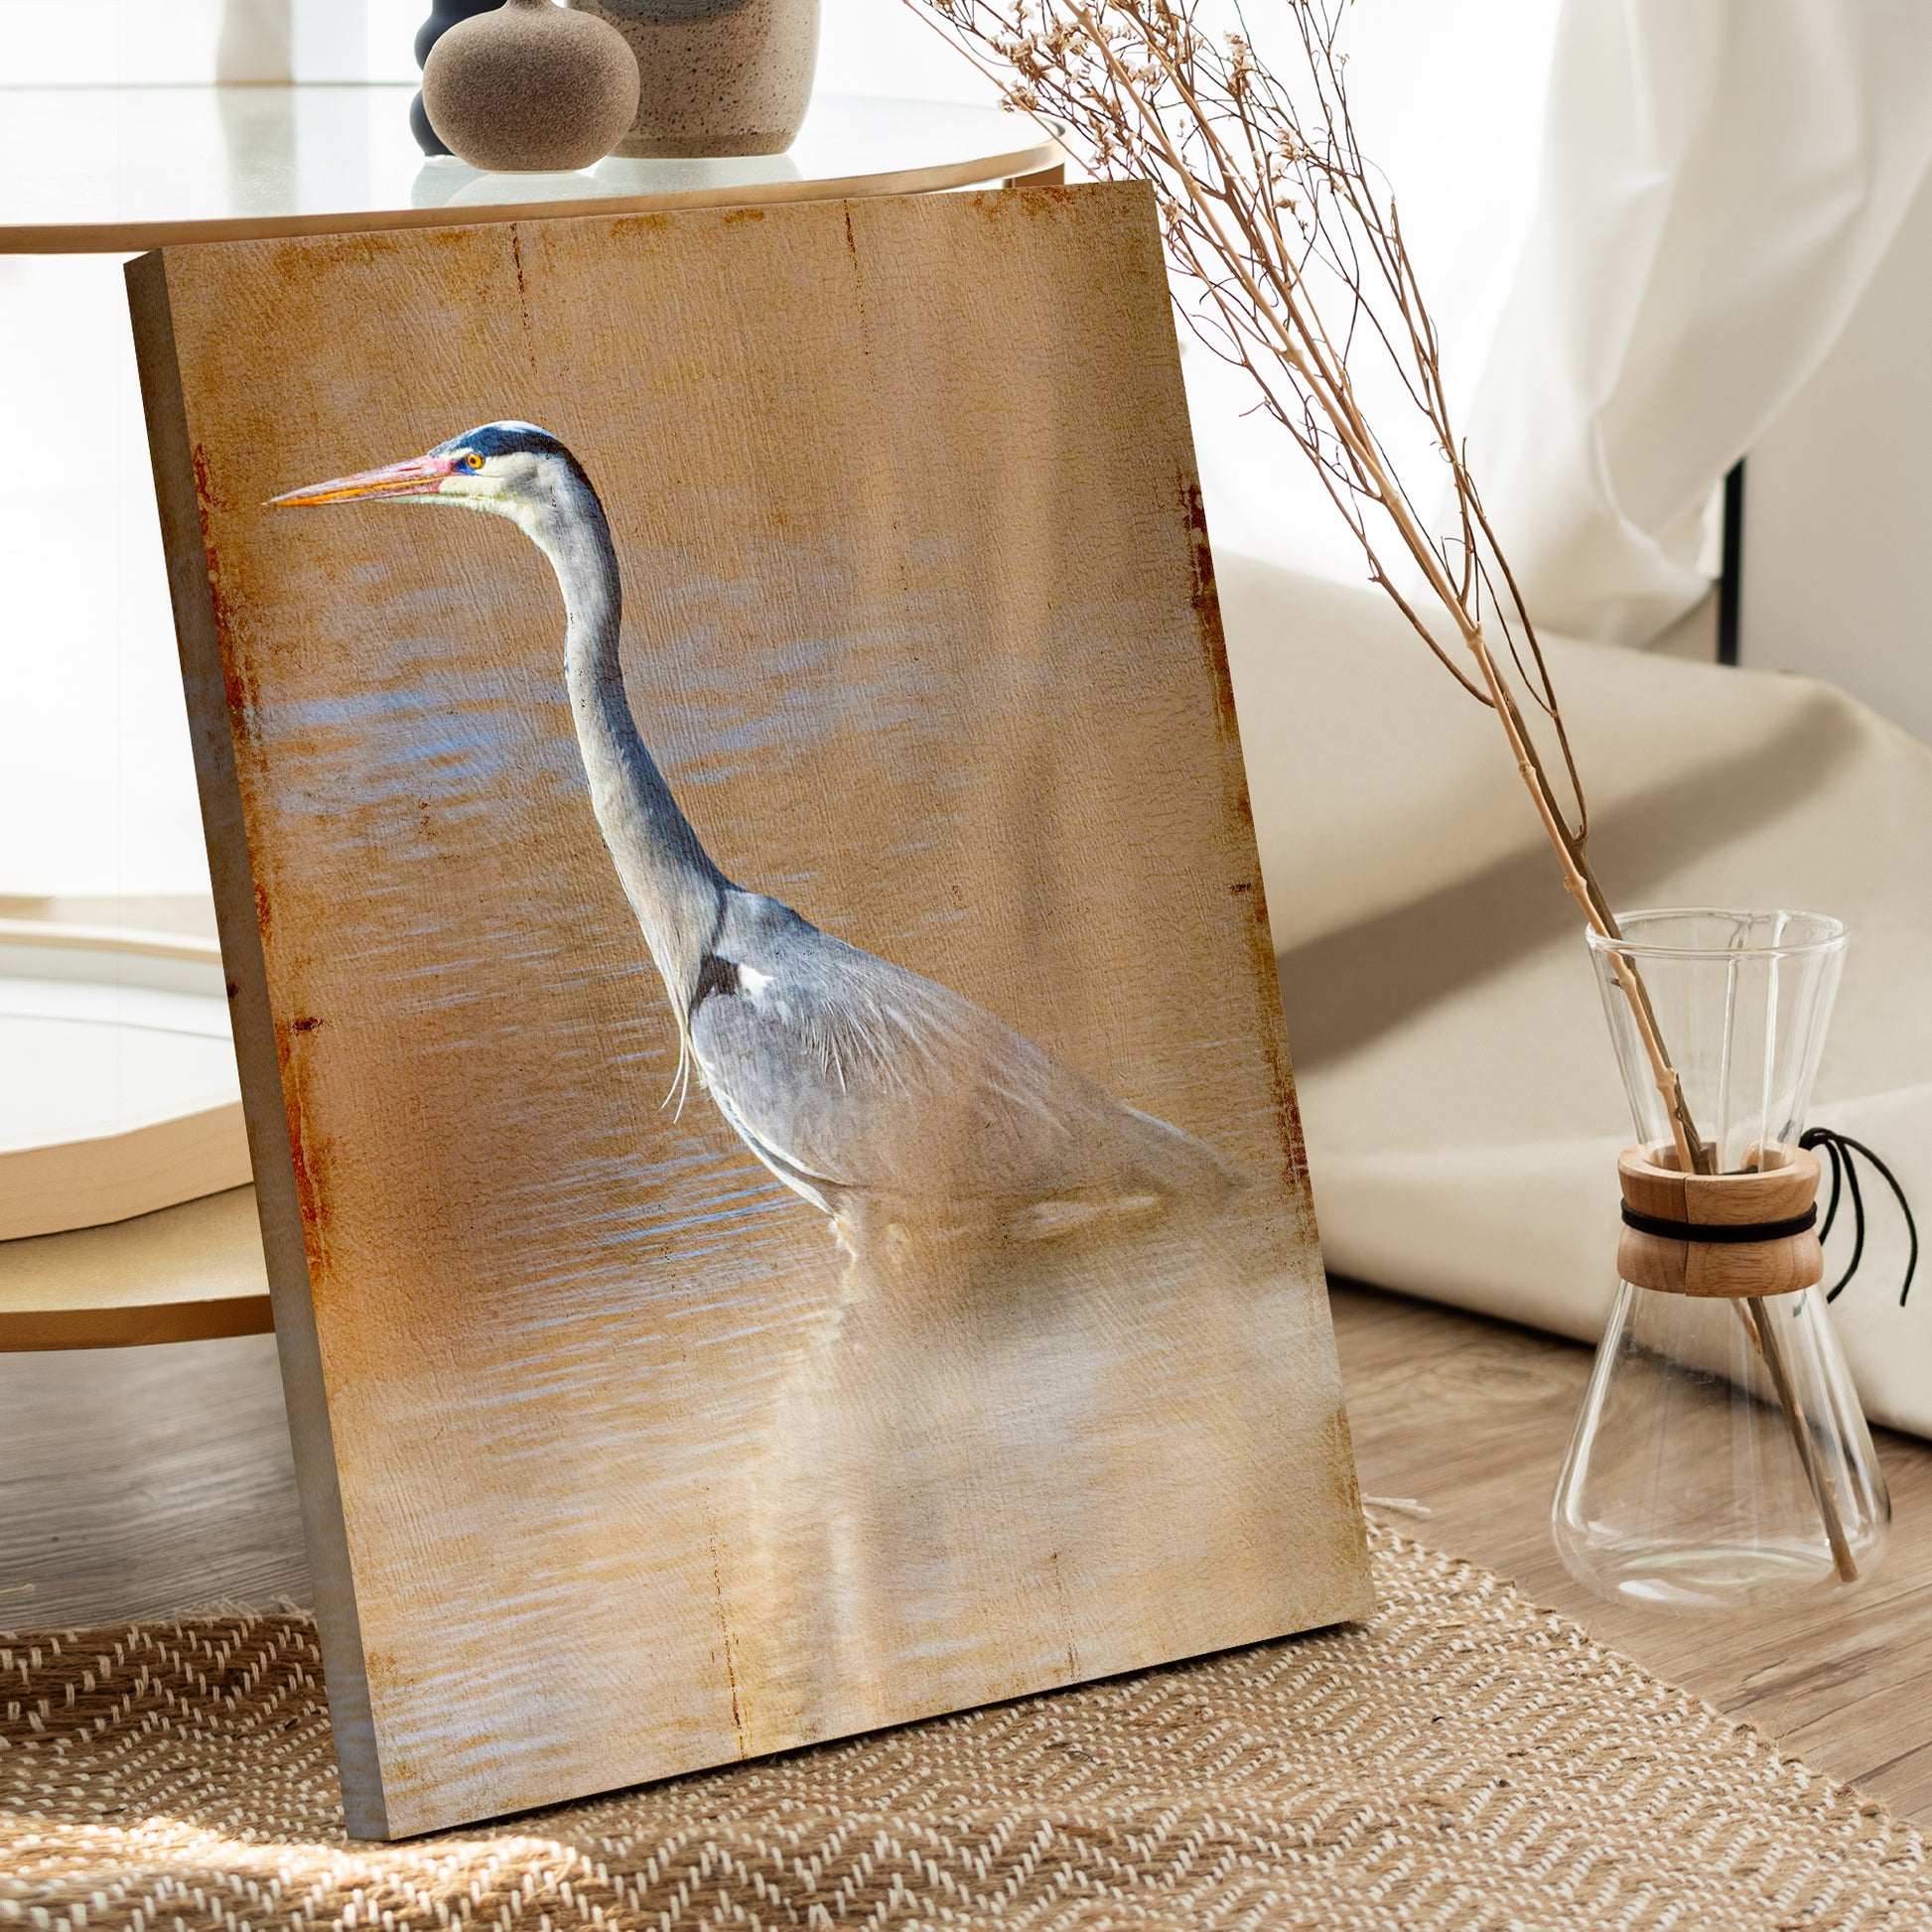 River Heron Portrait Canvas Wall Art Style 2 - Image by Tailored Canvases